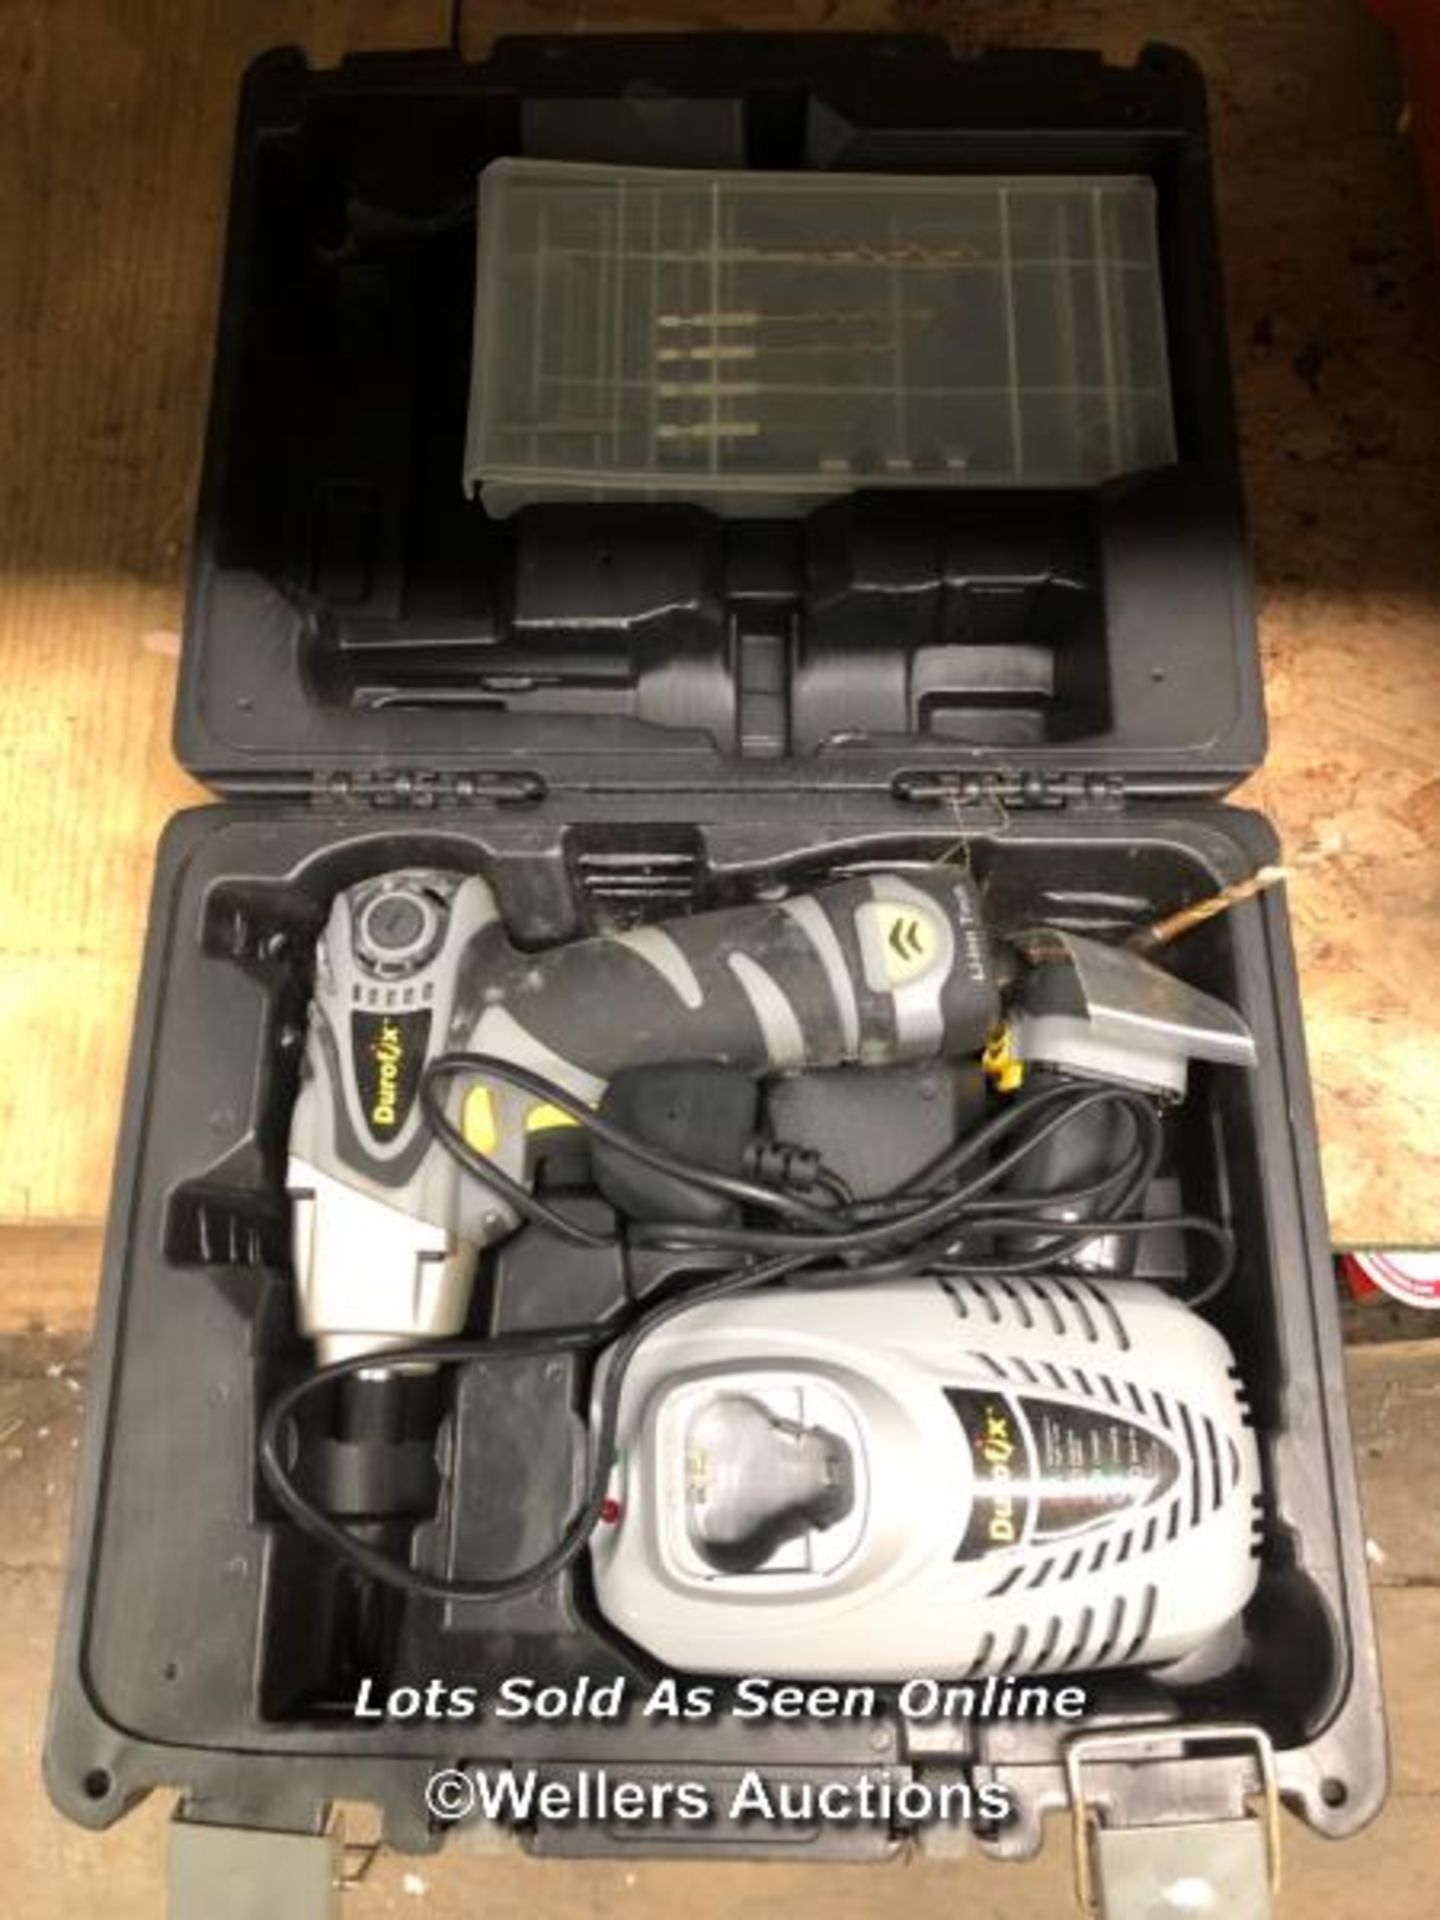 DUROFIX RI1239 CORDLESS IMPACT DRIVER WITH 2X BATTERIES AND A CHARGER, IN CASE